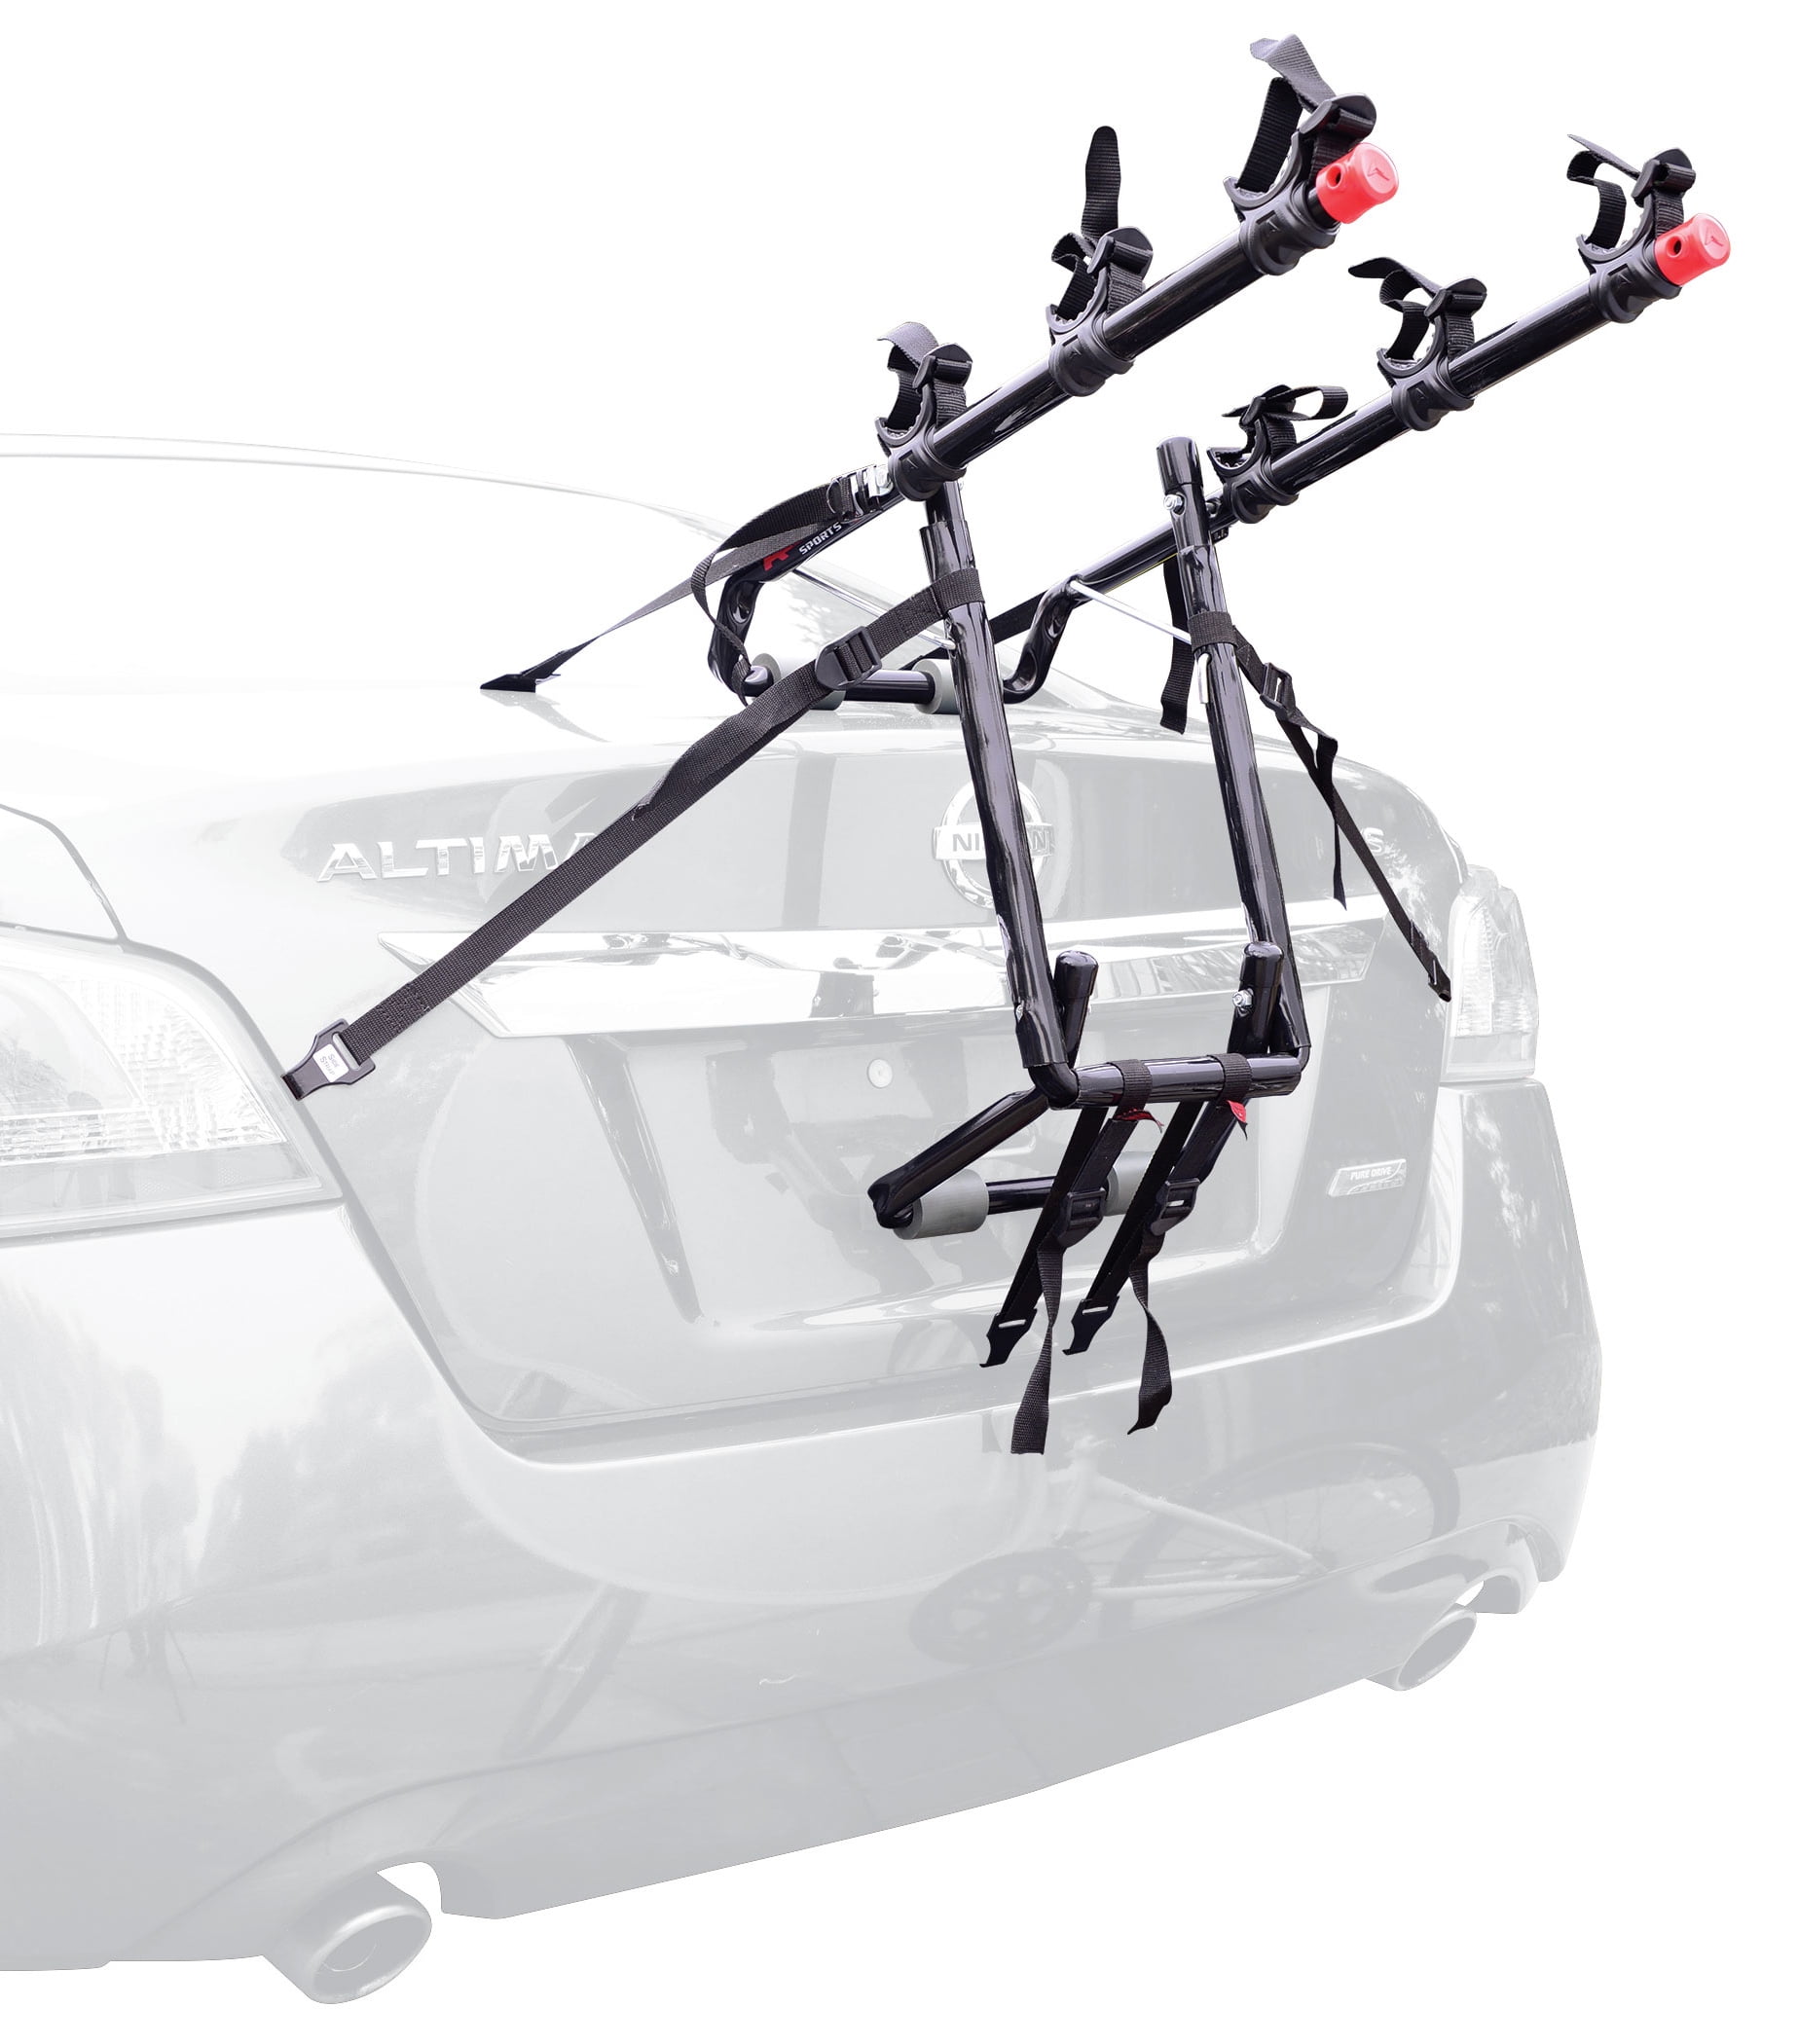 Details about   2 Bike Trunk Rack Rear Mount Two Bikes Carrier Car SUV Bicycle Sedans Sturdy Arm 